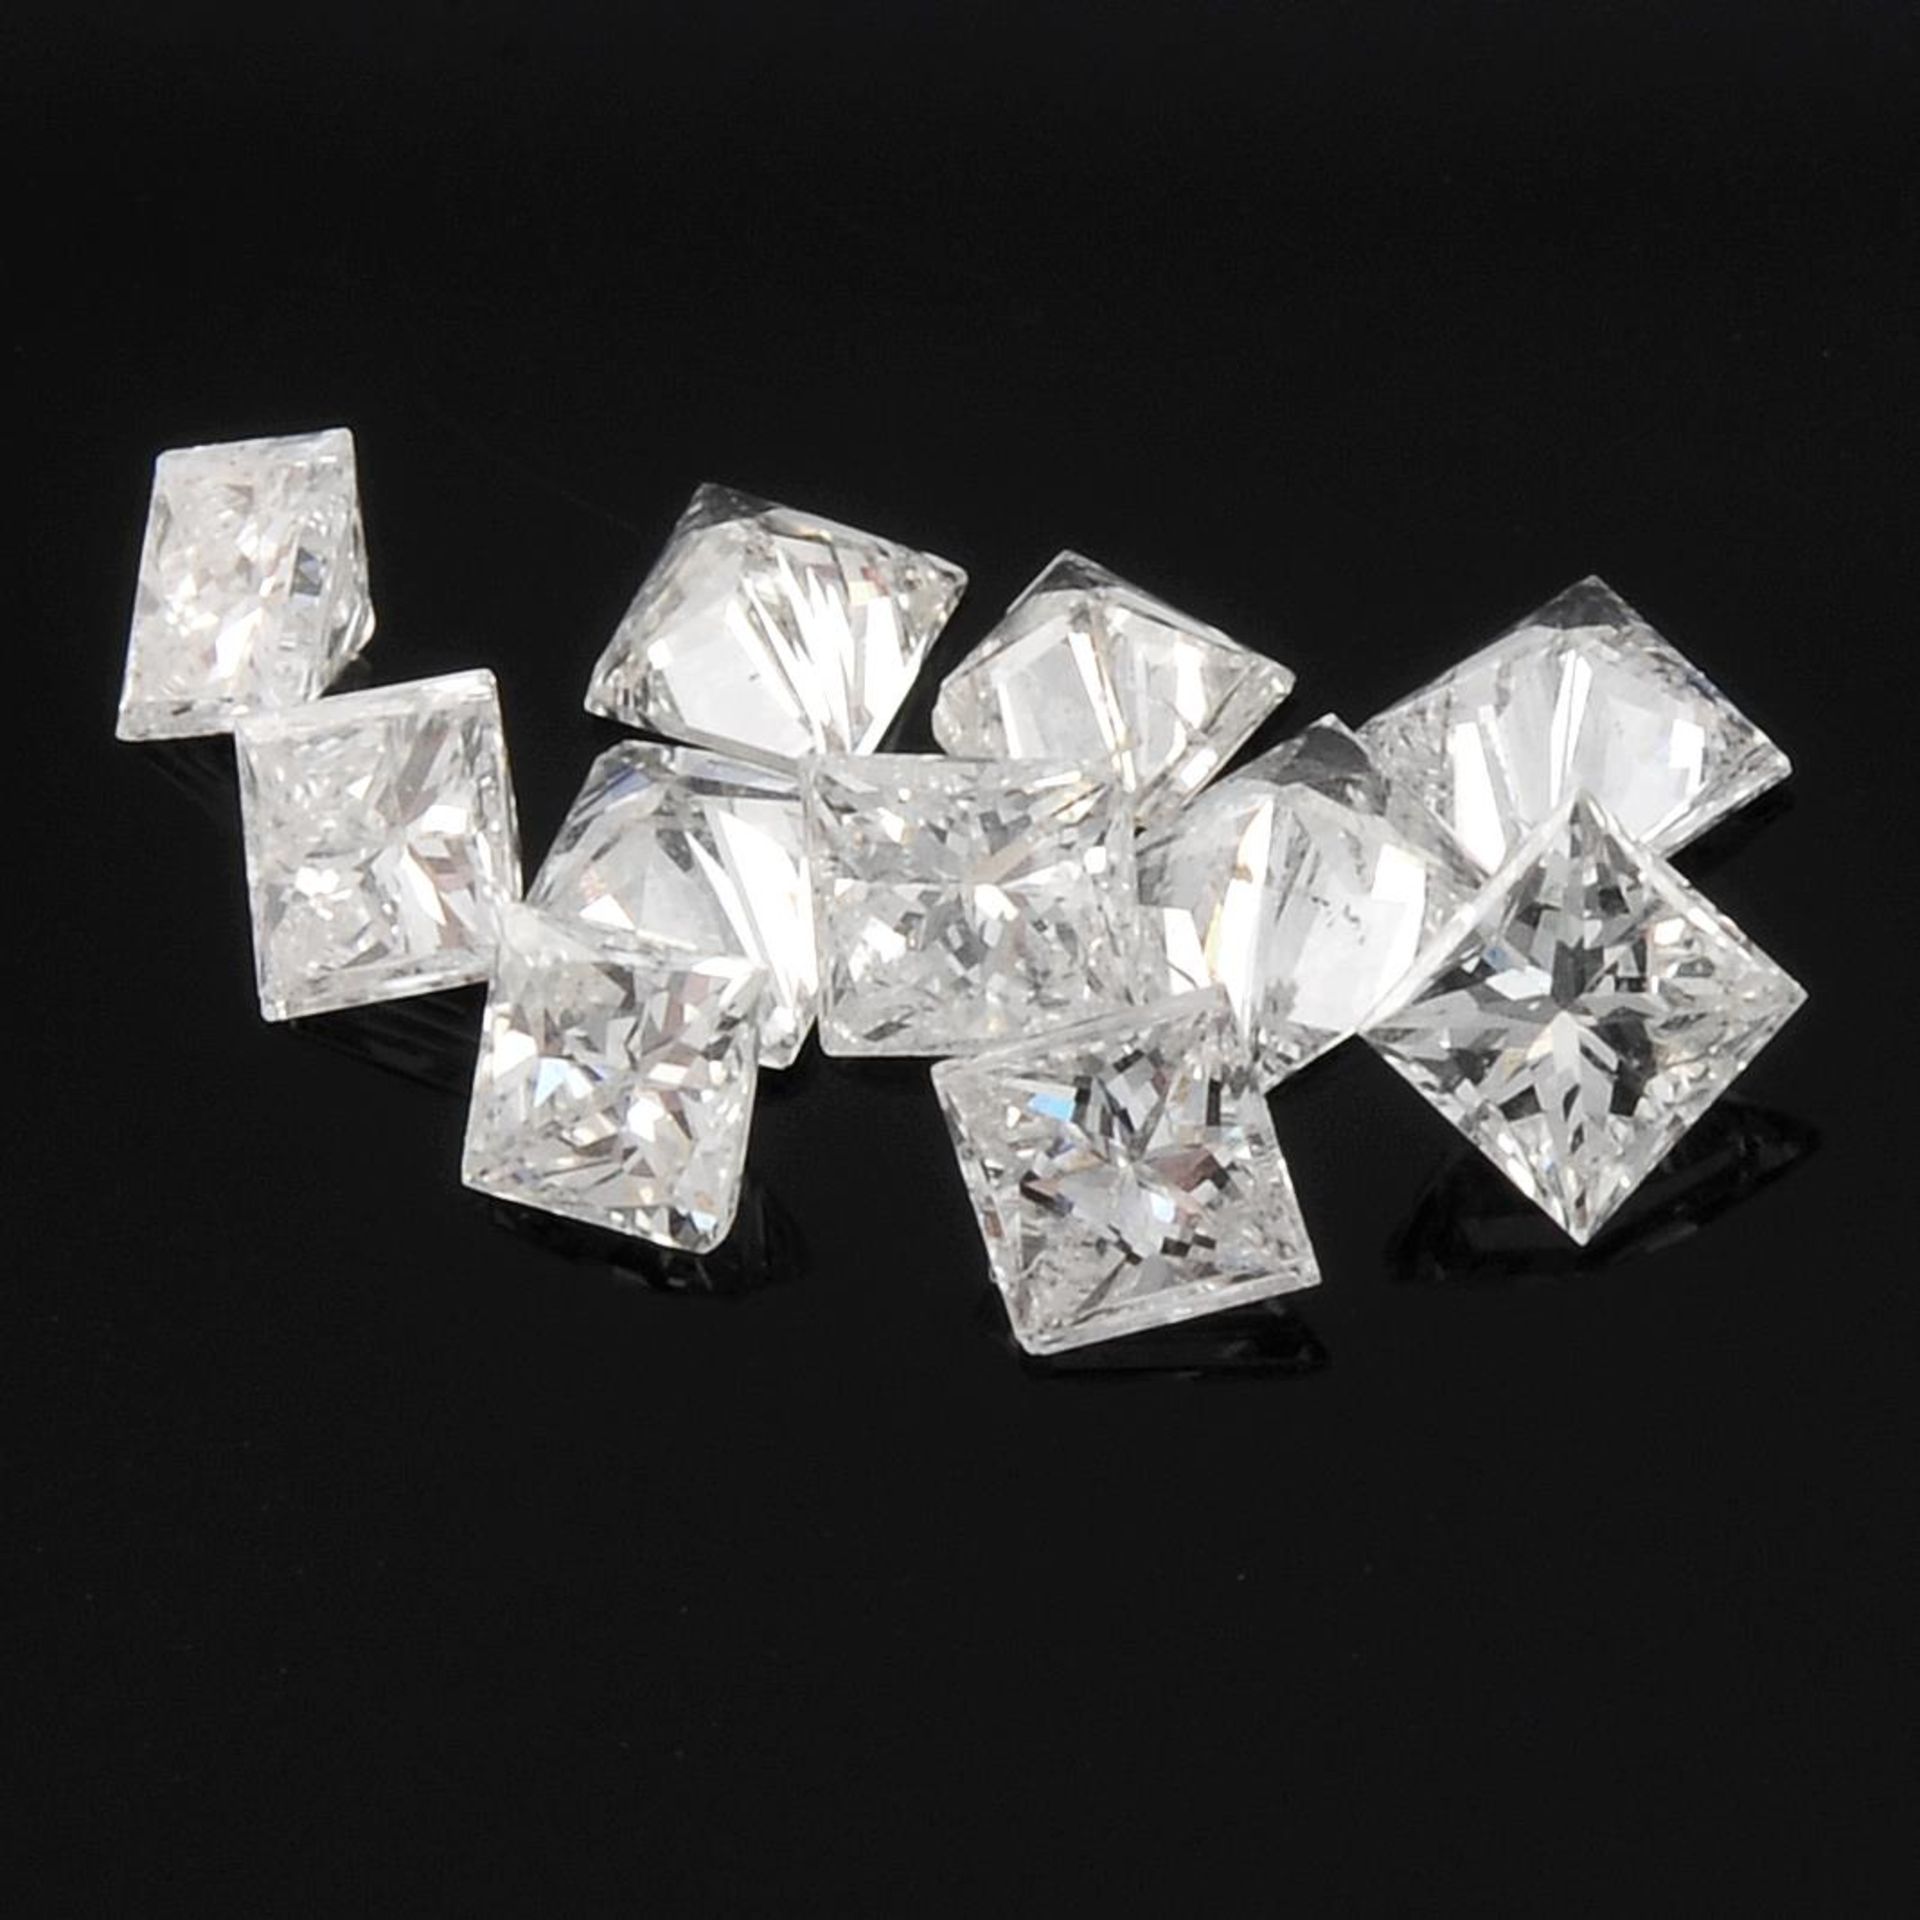 Selection of square shape diamonds, weighing 2.83ct.